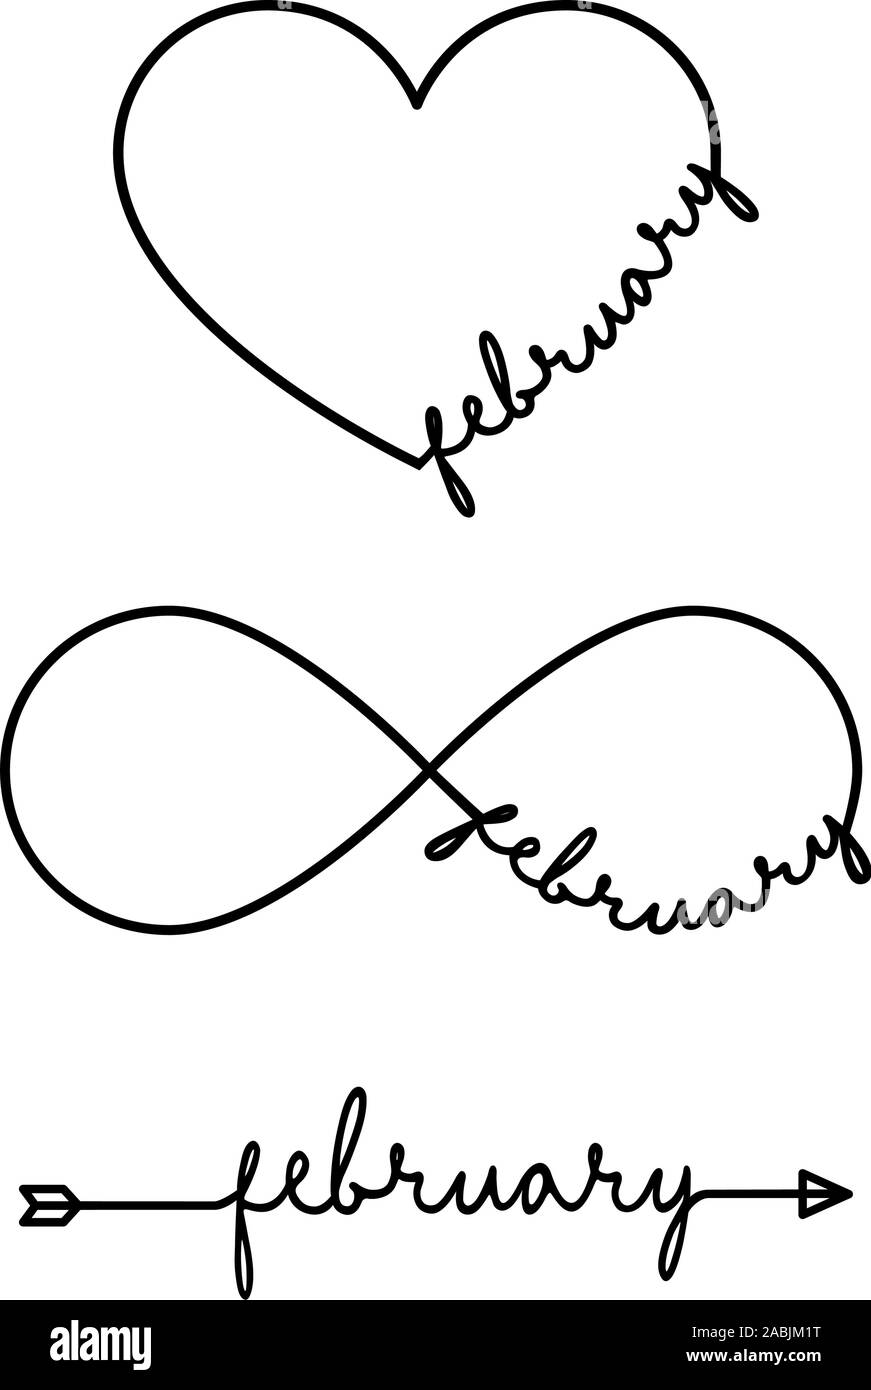 June - word with infinity symbol hand drawn heart Vector Image